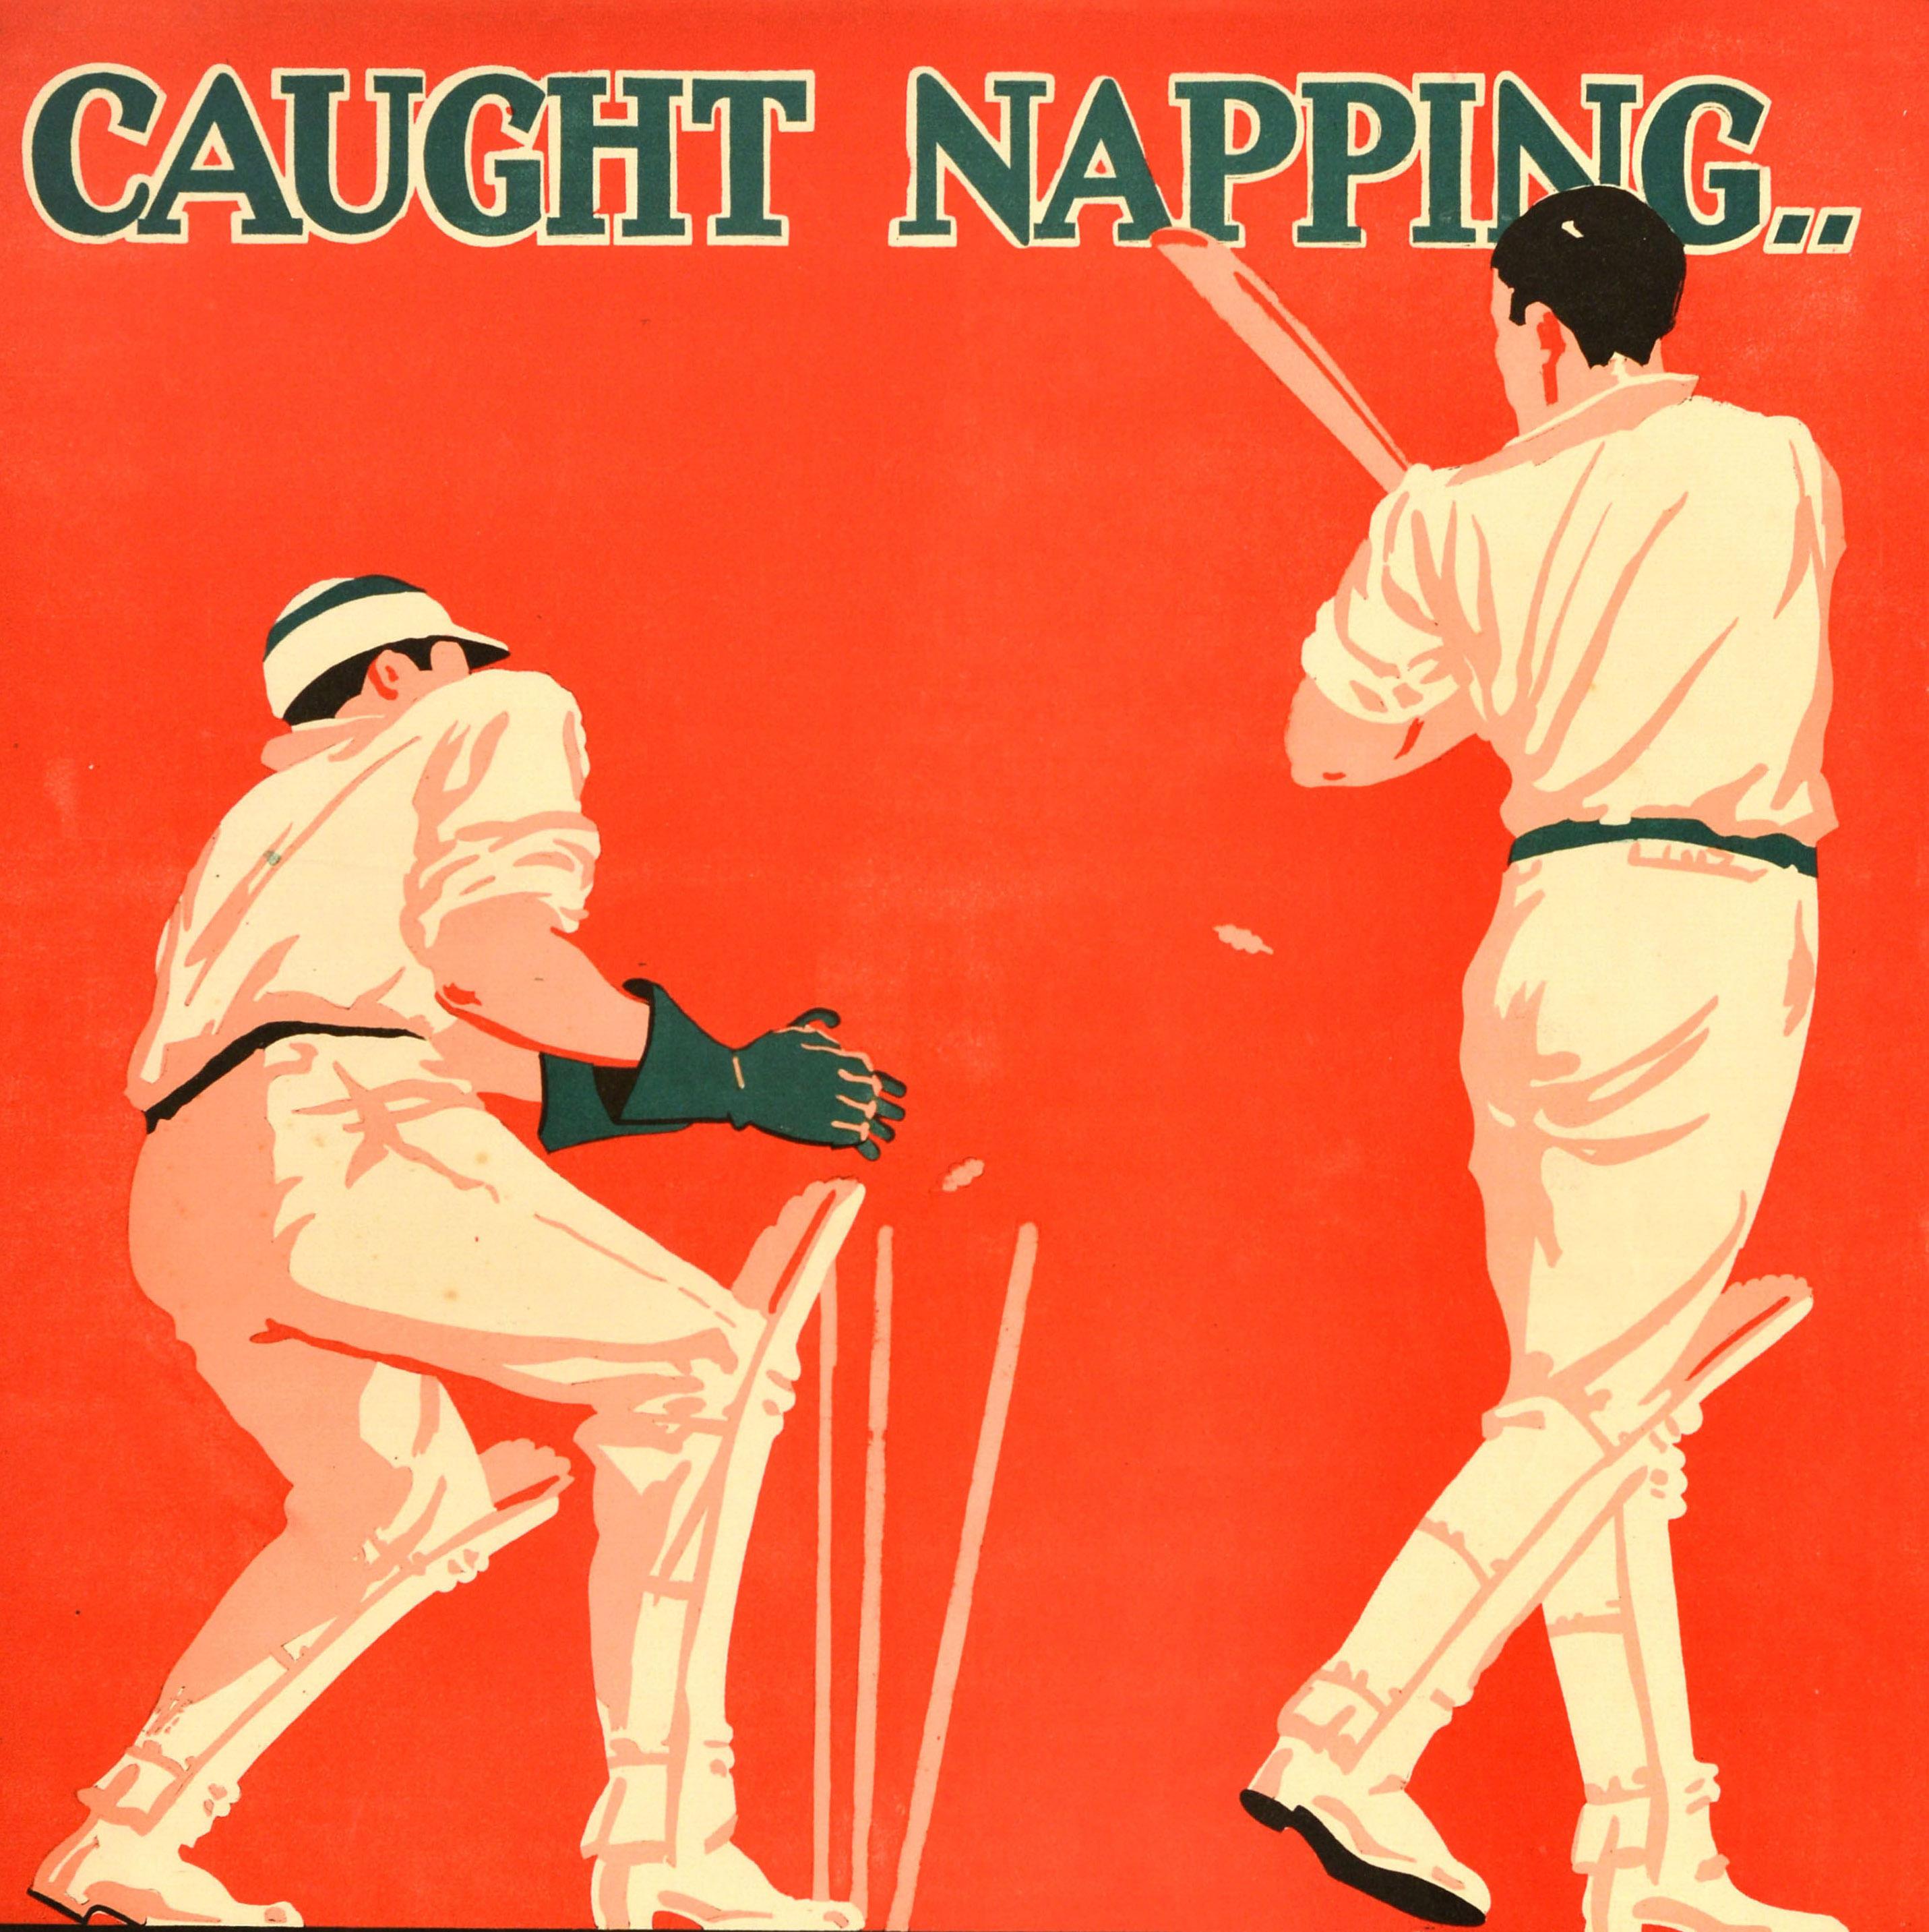 Original vintage workplace motivational poster - Caught napping ... Only those who keep their minds on their work advance to better jobs Get in the Game Bill Jones - featuring a sport themed illustration of cricket players set on a red background,